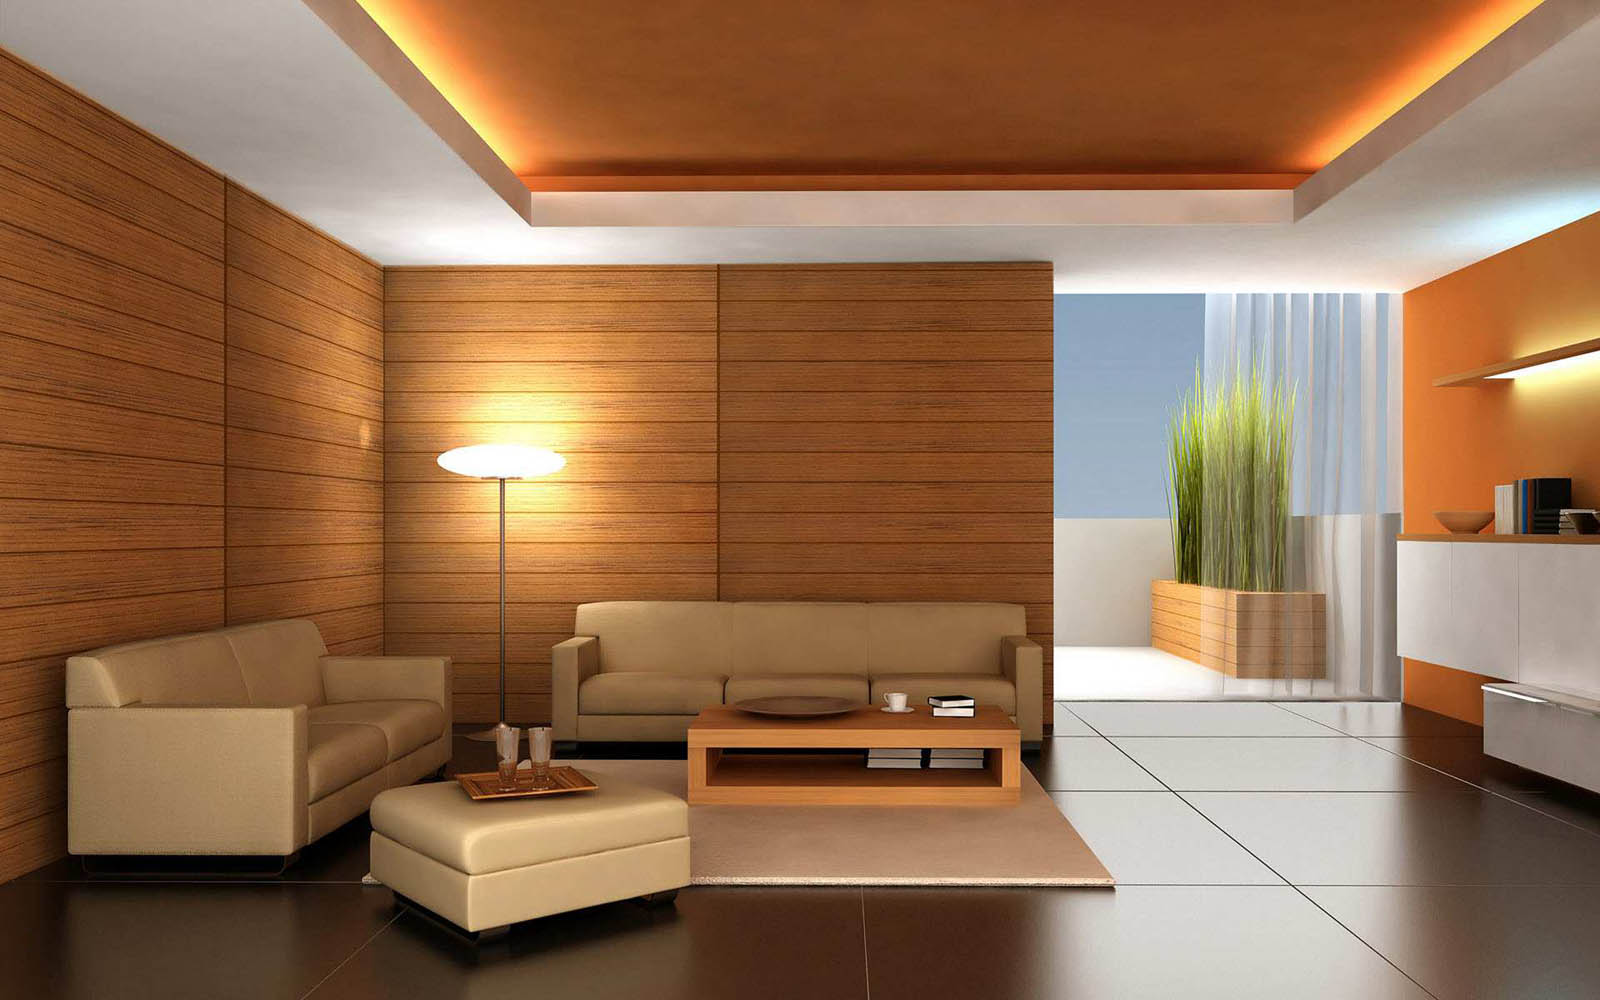 Tag Modern Living Room Photos Wallpaper Background Image And